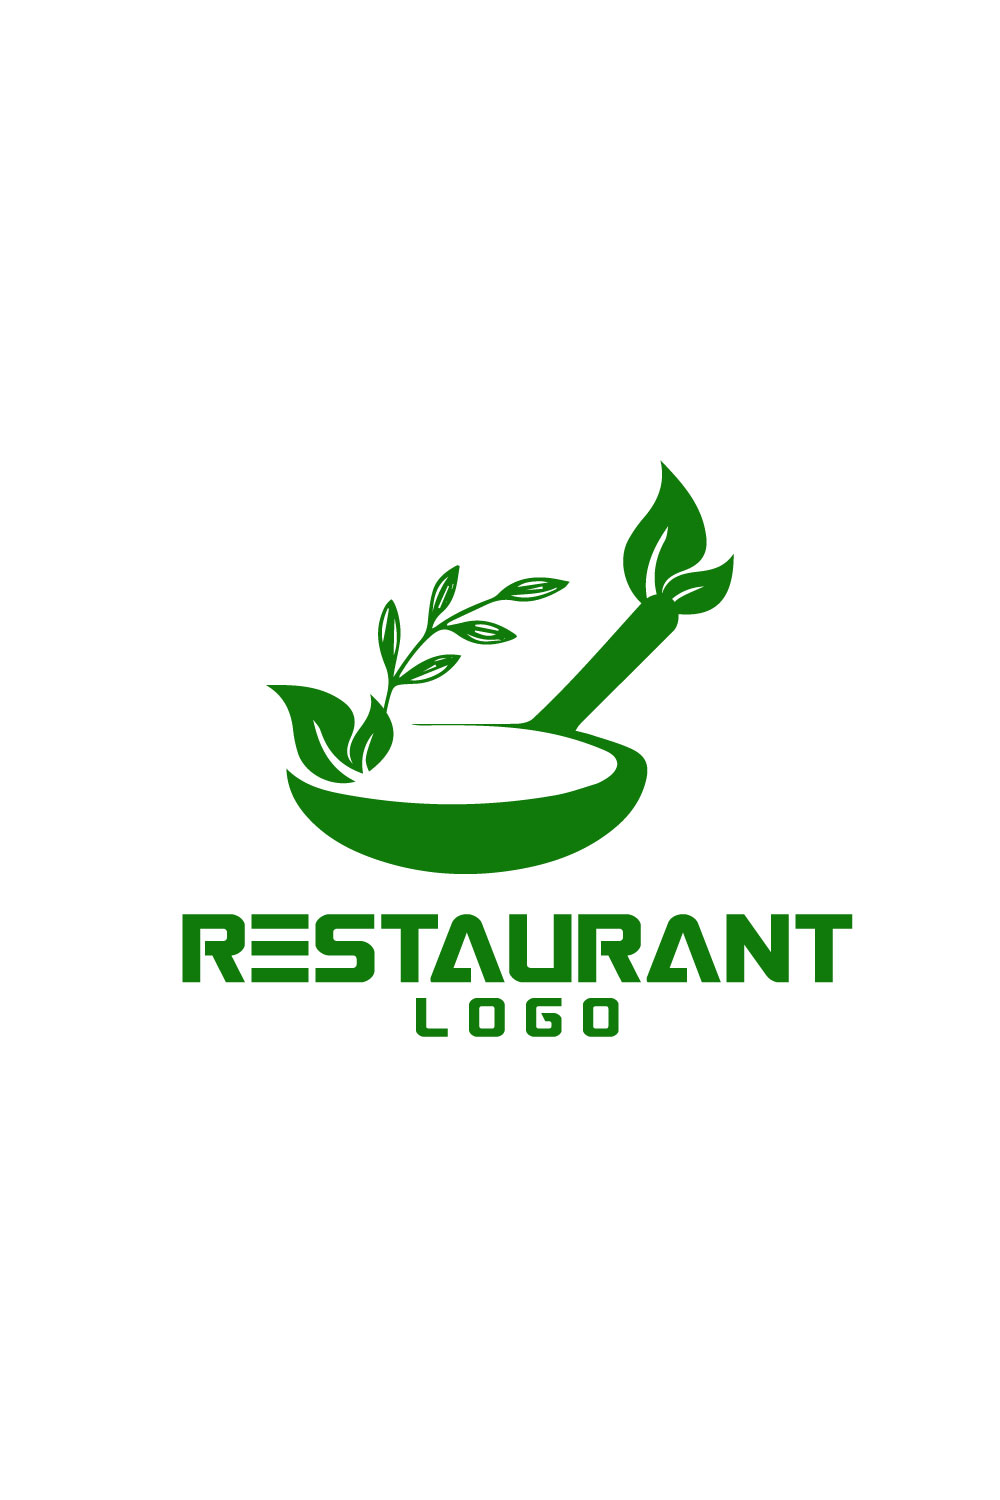 Free Culinary Canvas logo pinterest preview image.